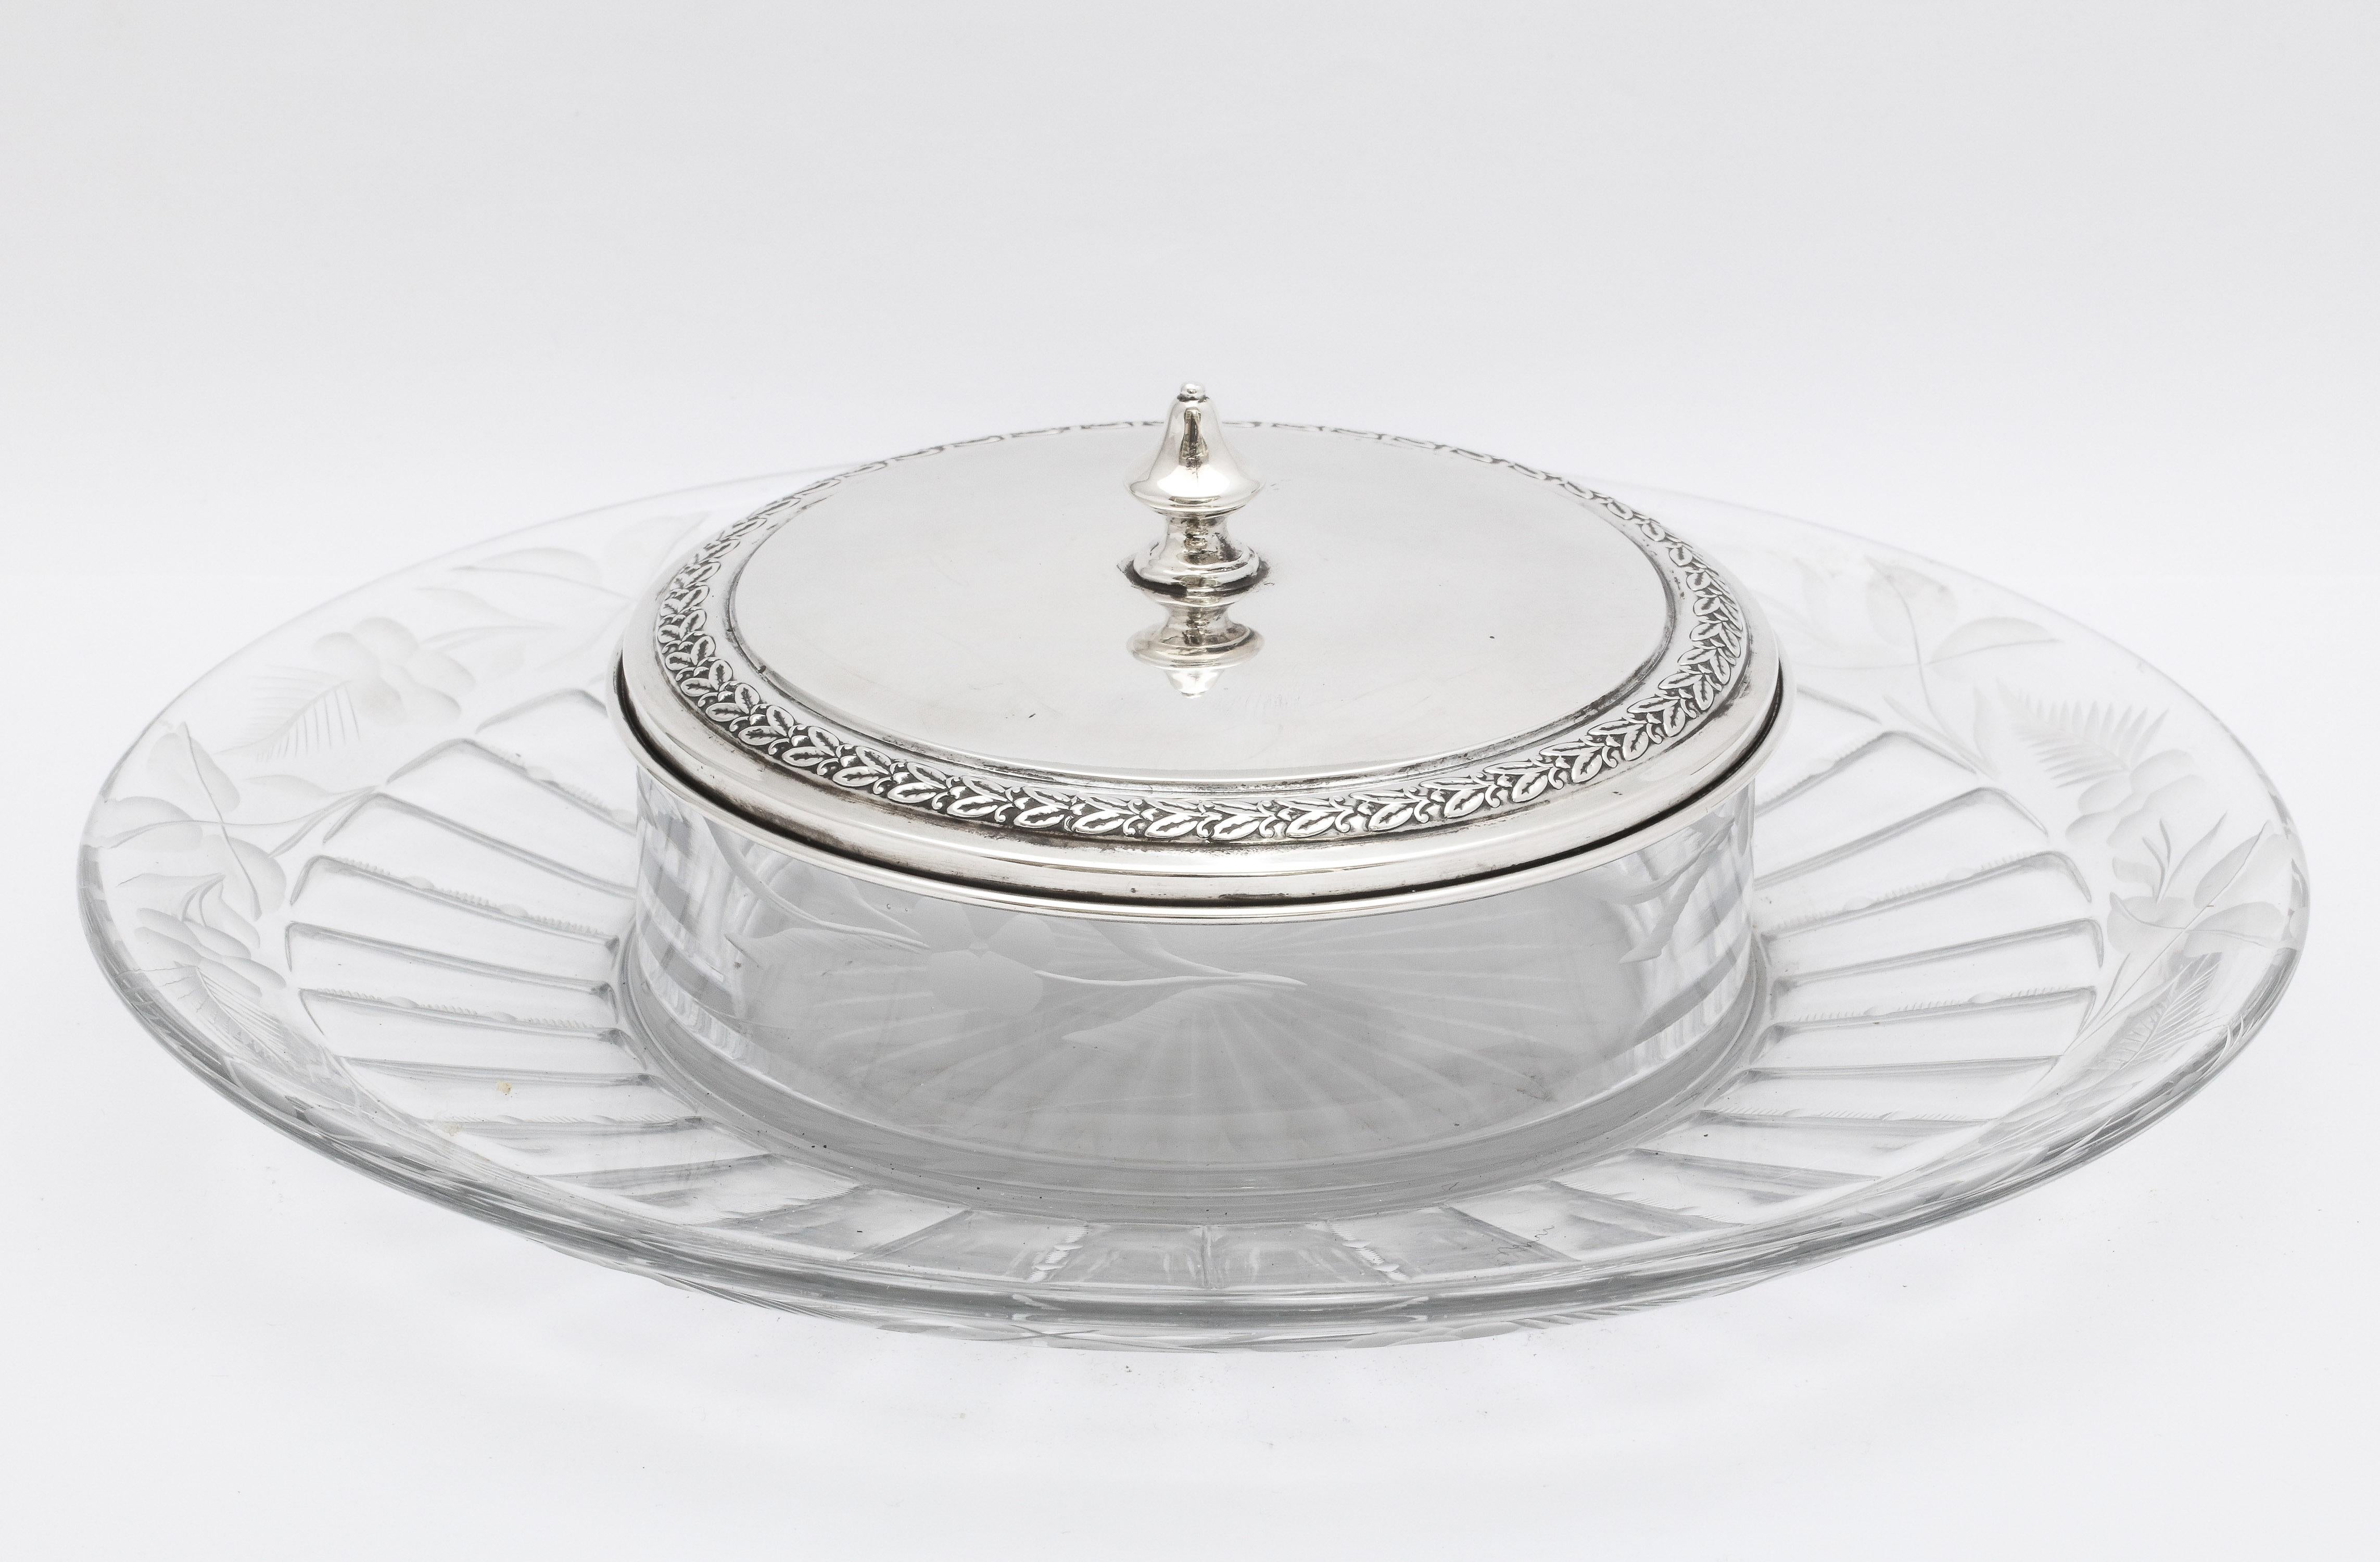 Mid-20th Century Midcentury Period Sterling Silver and Glass Hors d'oeuvres/Caviar Platter For Sale